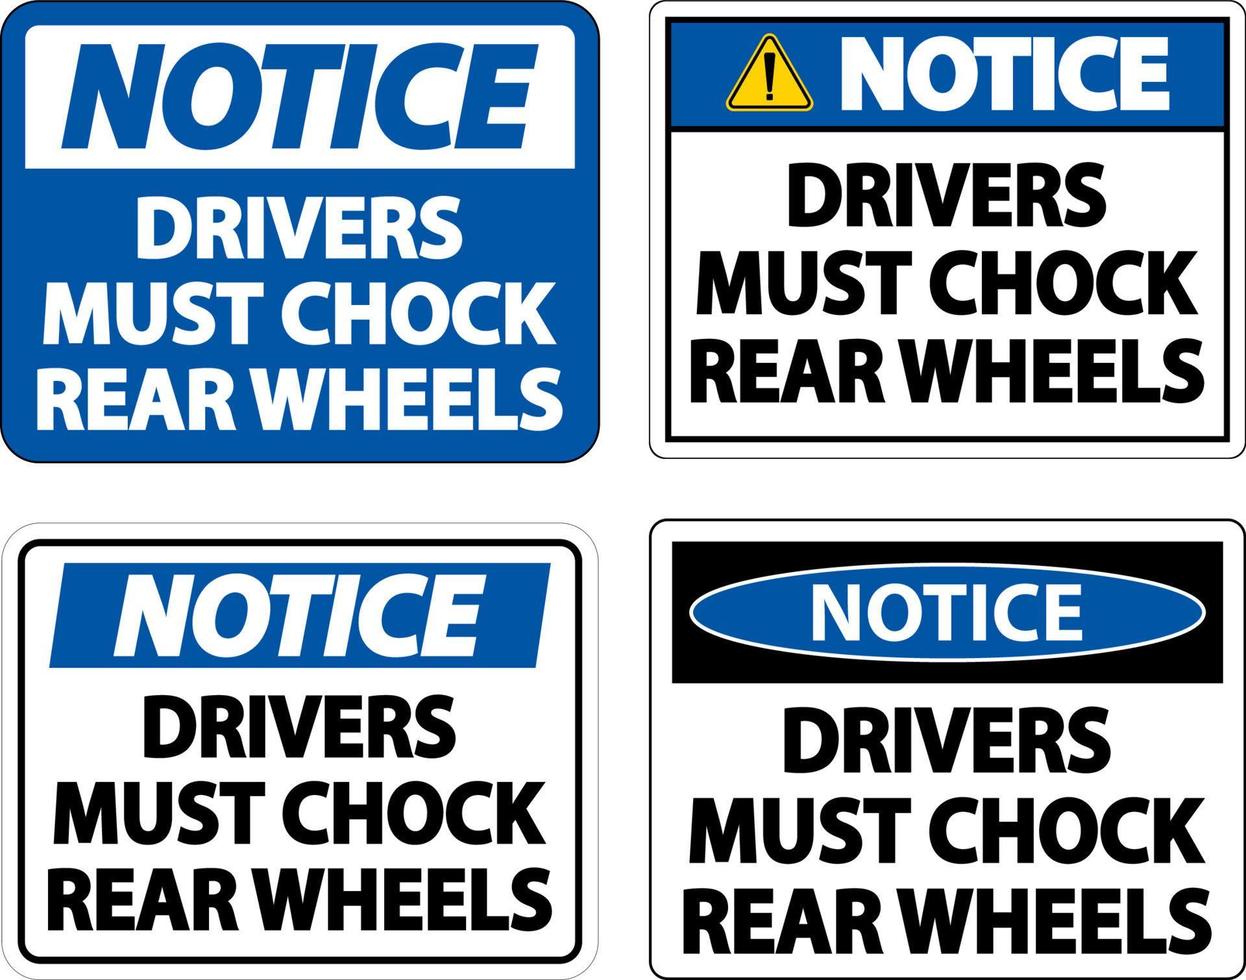 Notice Drivers Must Chock Wheels Label Sign On White Background vector